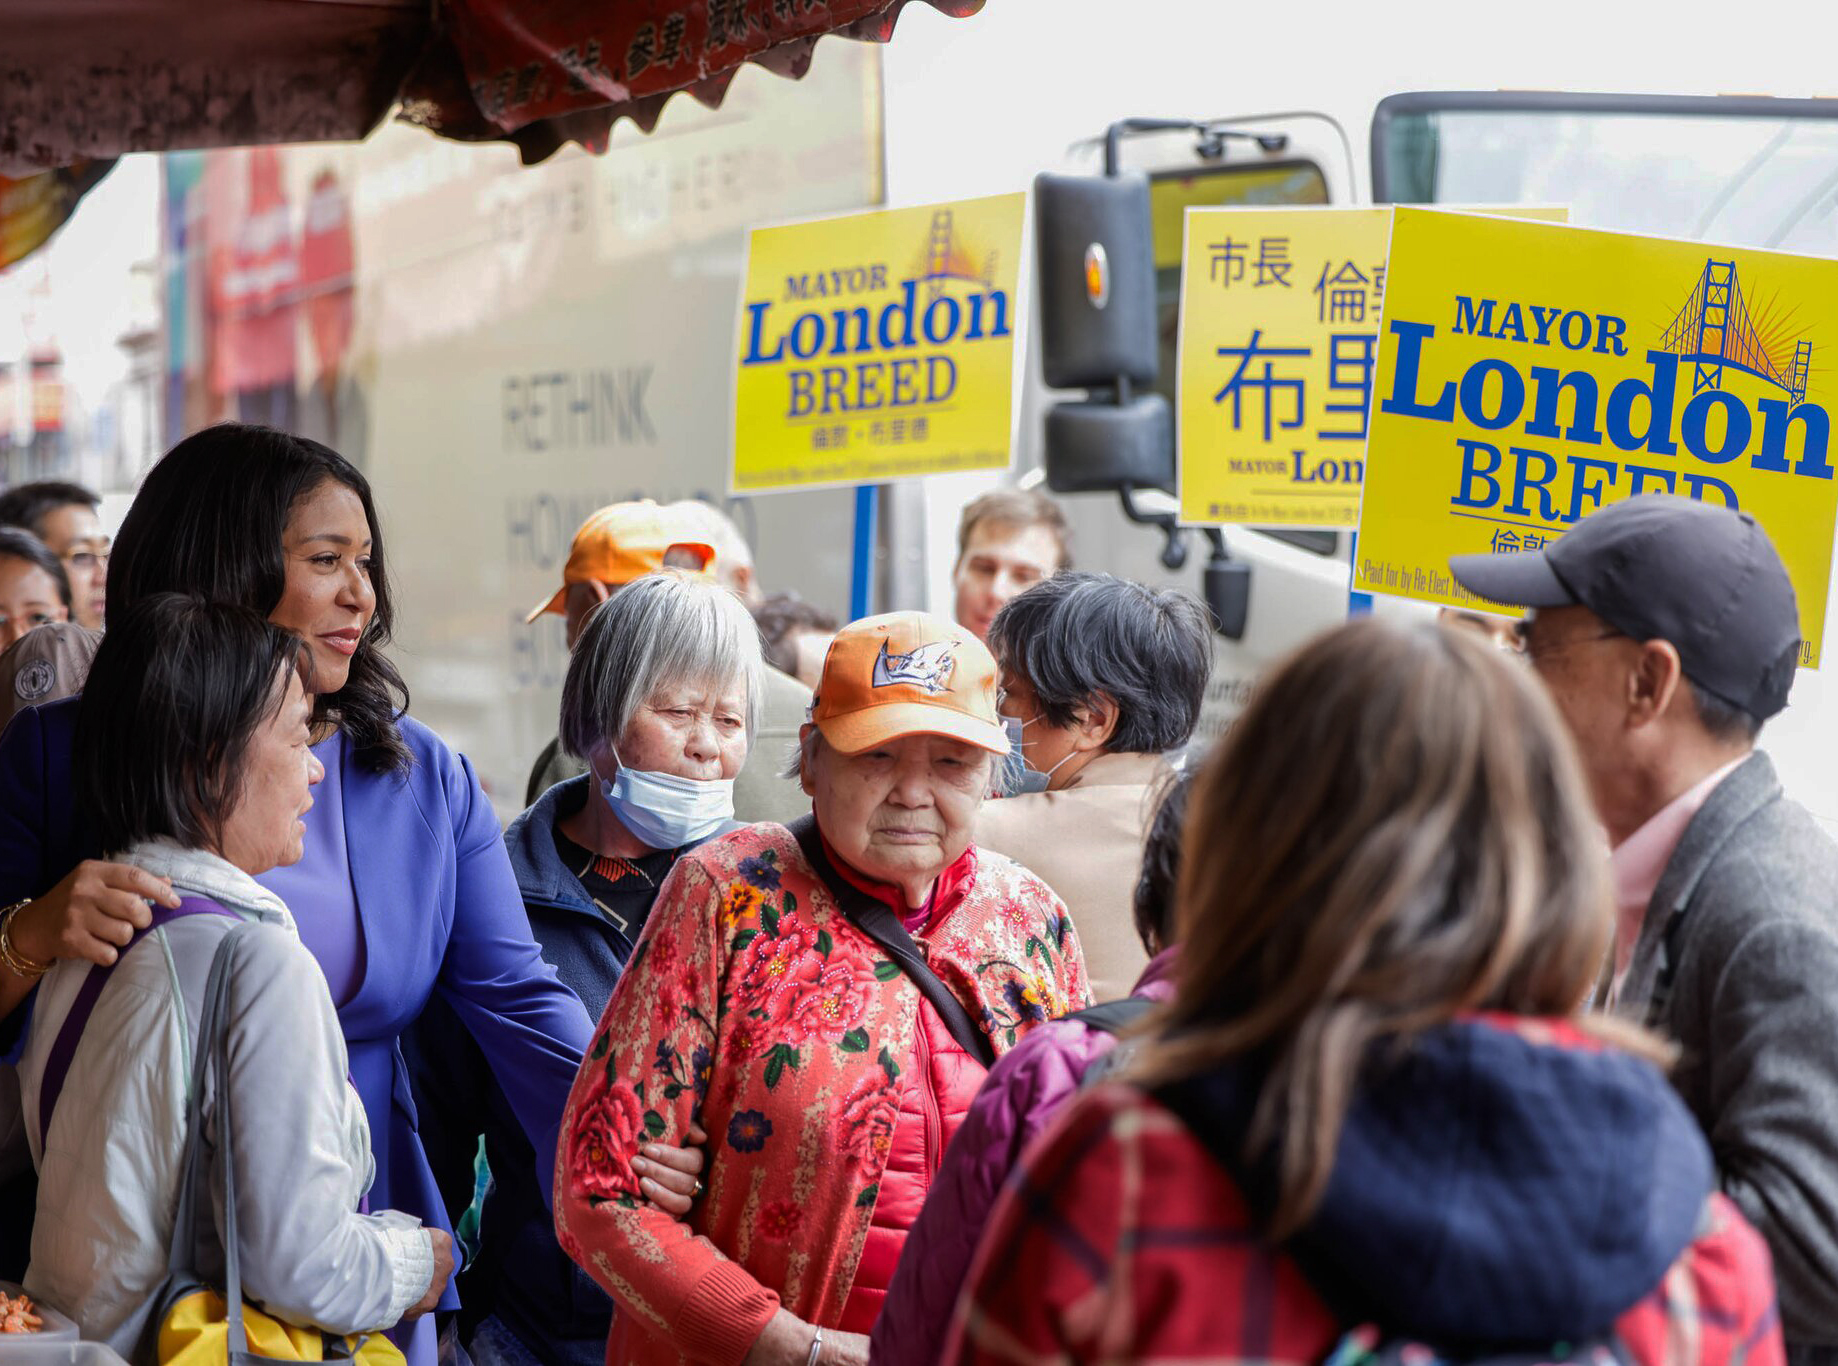 A group of seniors with &quot;Mayor London Breed&quot; signs in a bustling, lively setting.